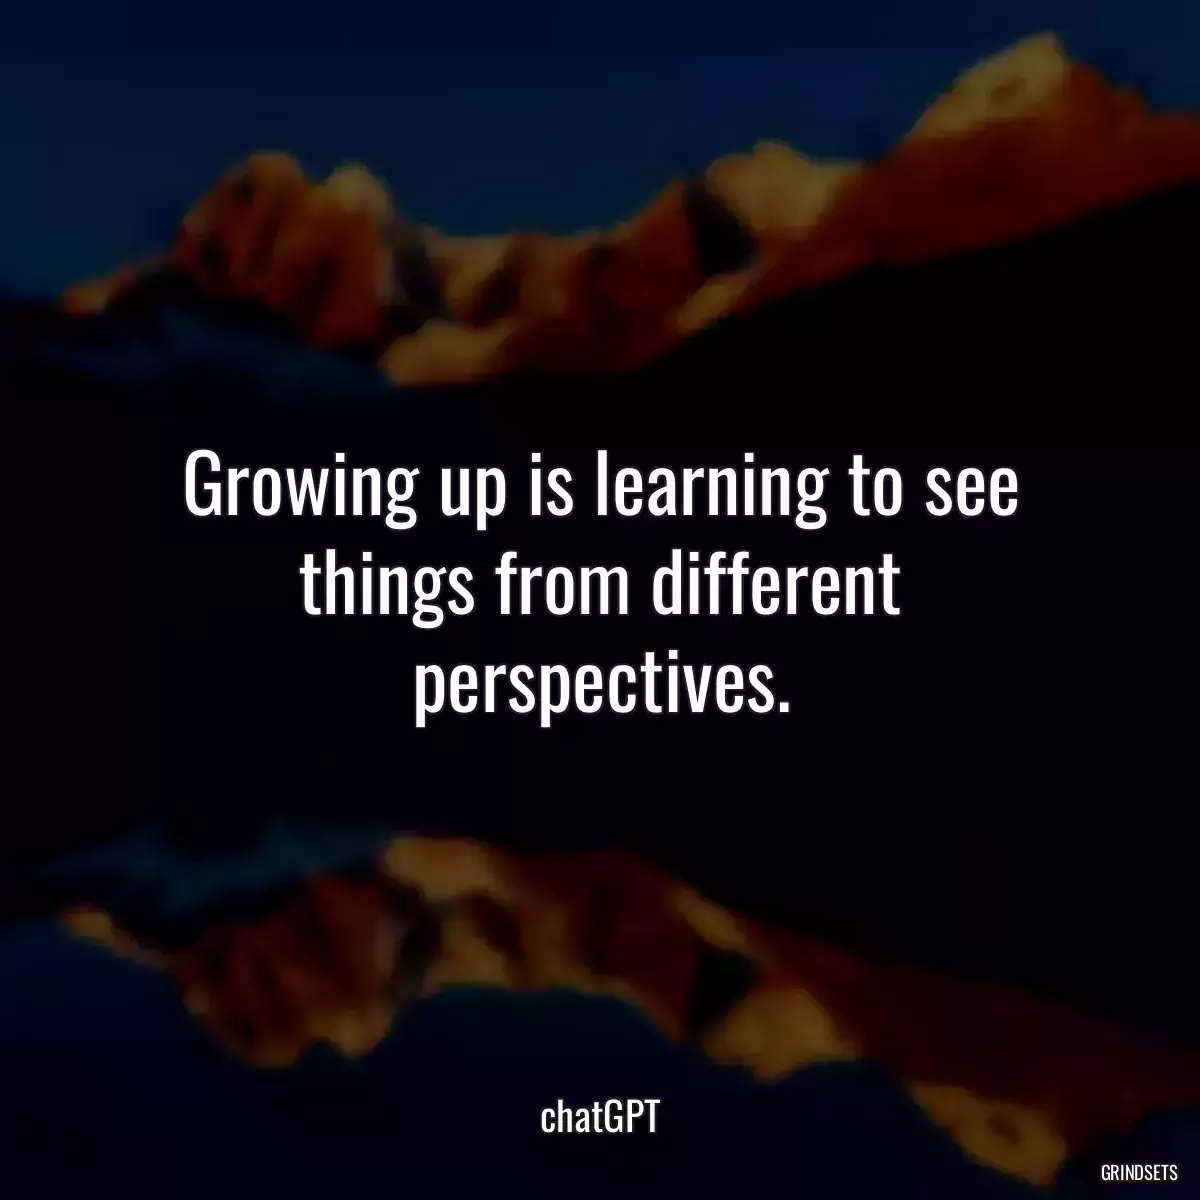 Growing up is learning to see things from different perspectives.